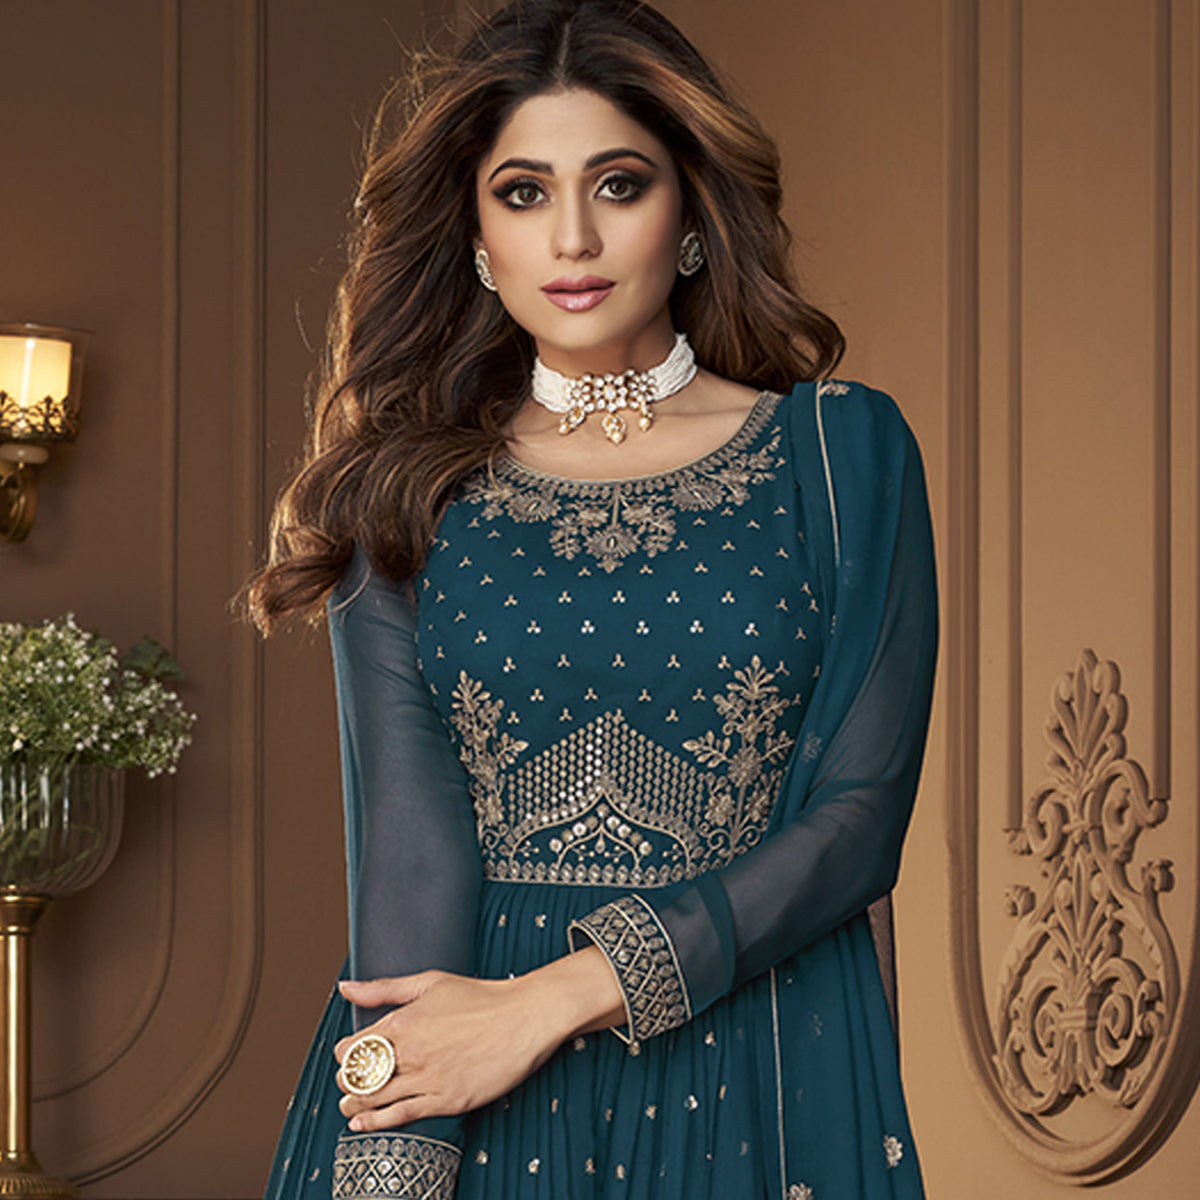 Shafnufab Heavy Faux Georgette Semi Stitched Plazzo Suit In Turquoise Colour